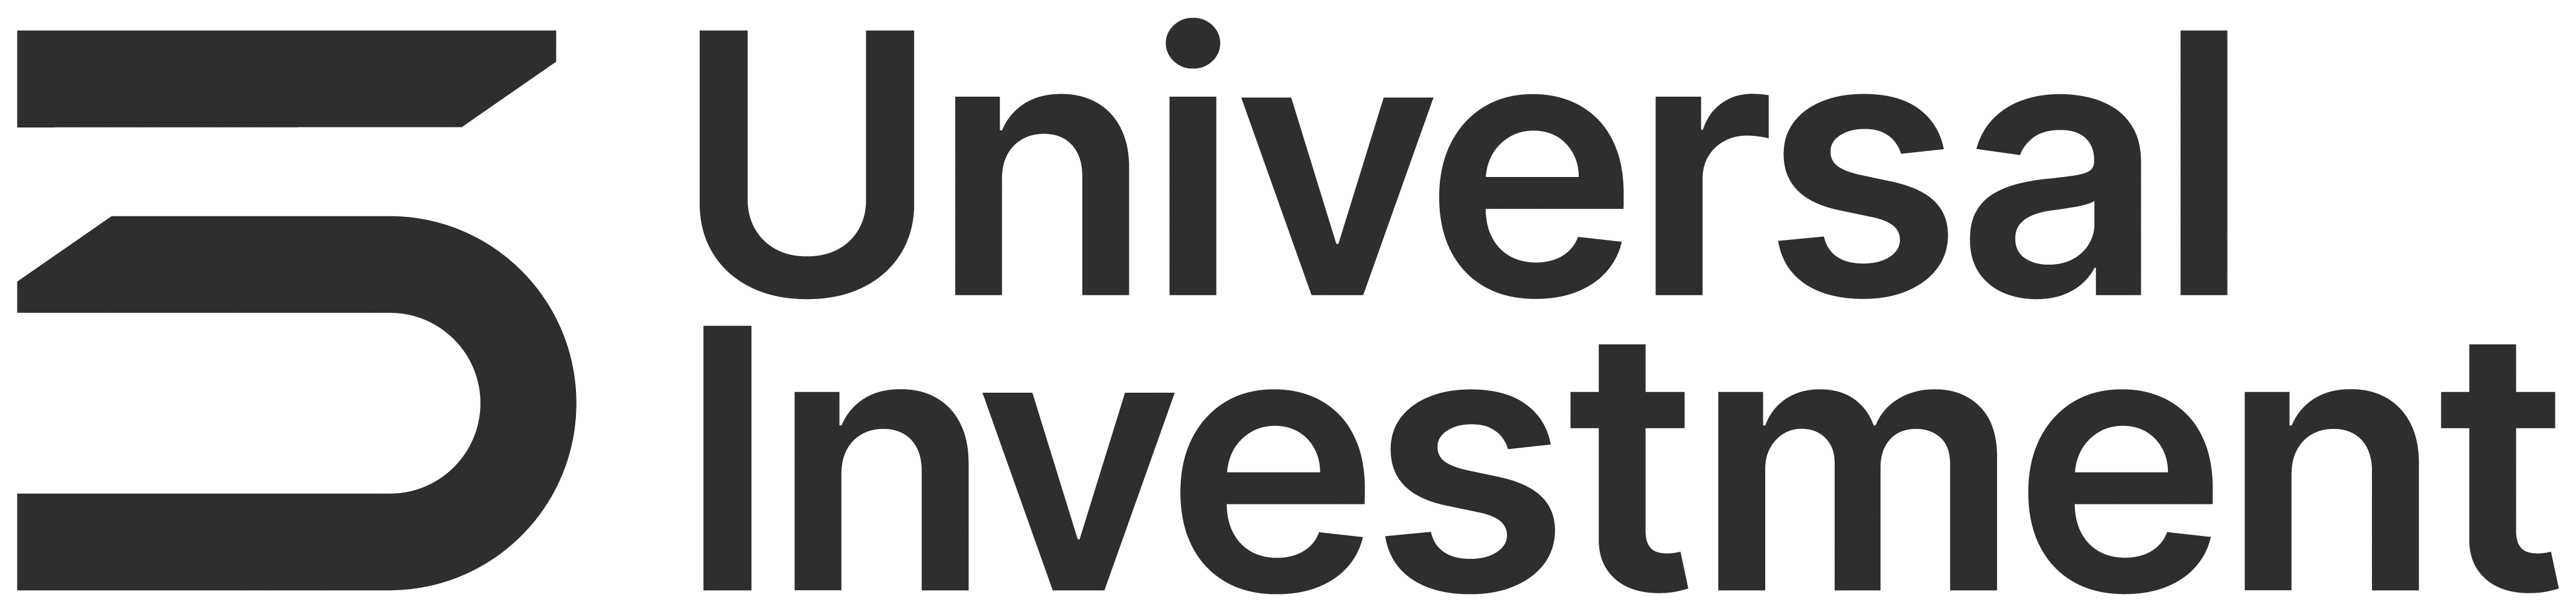 universal_investment_logo.png